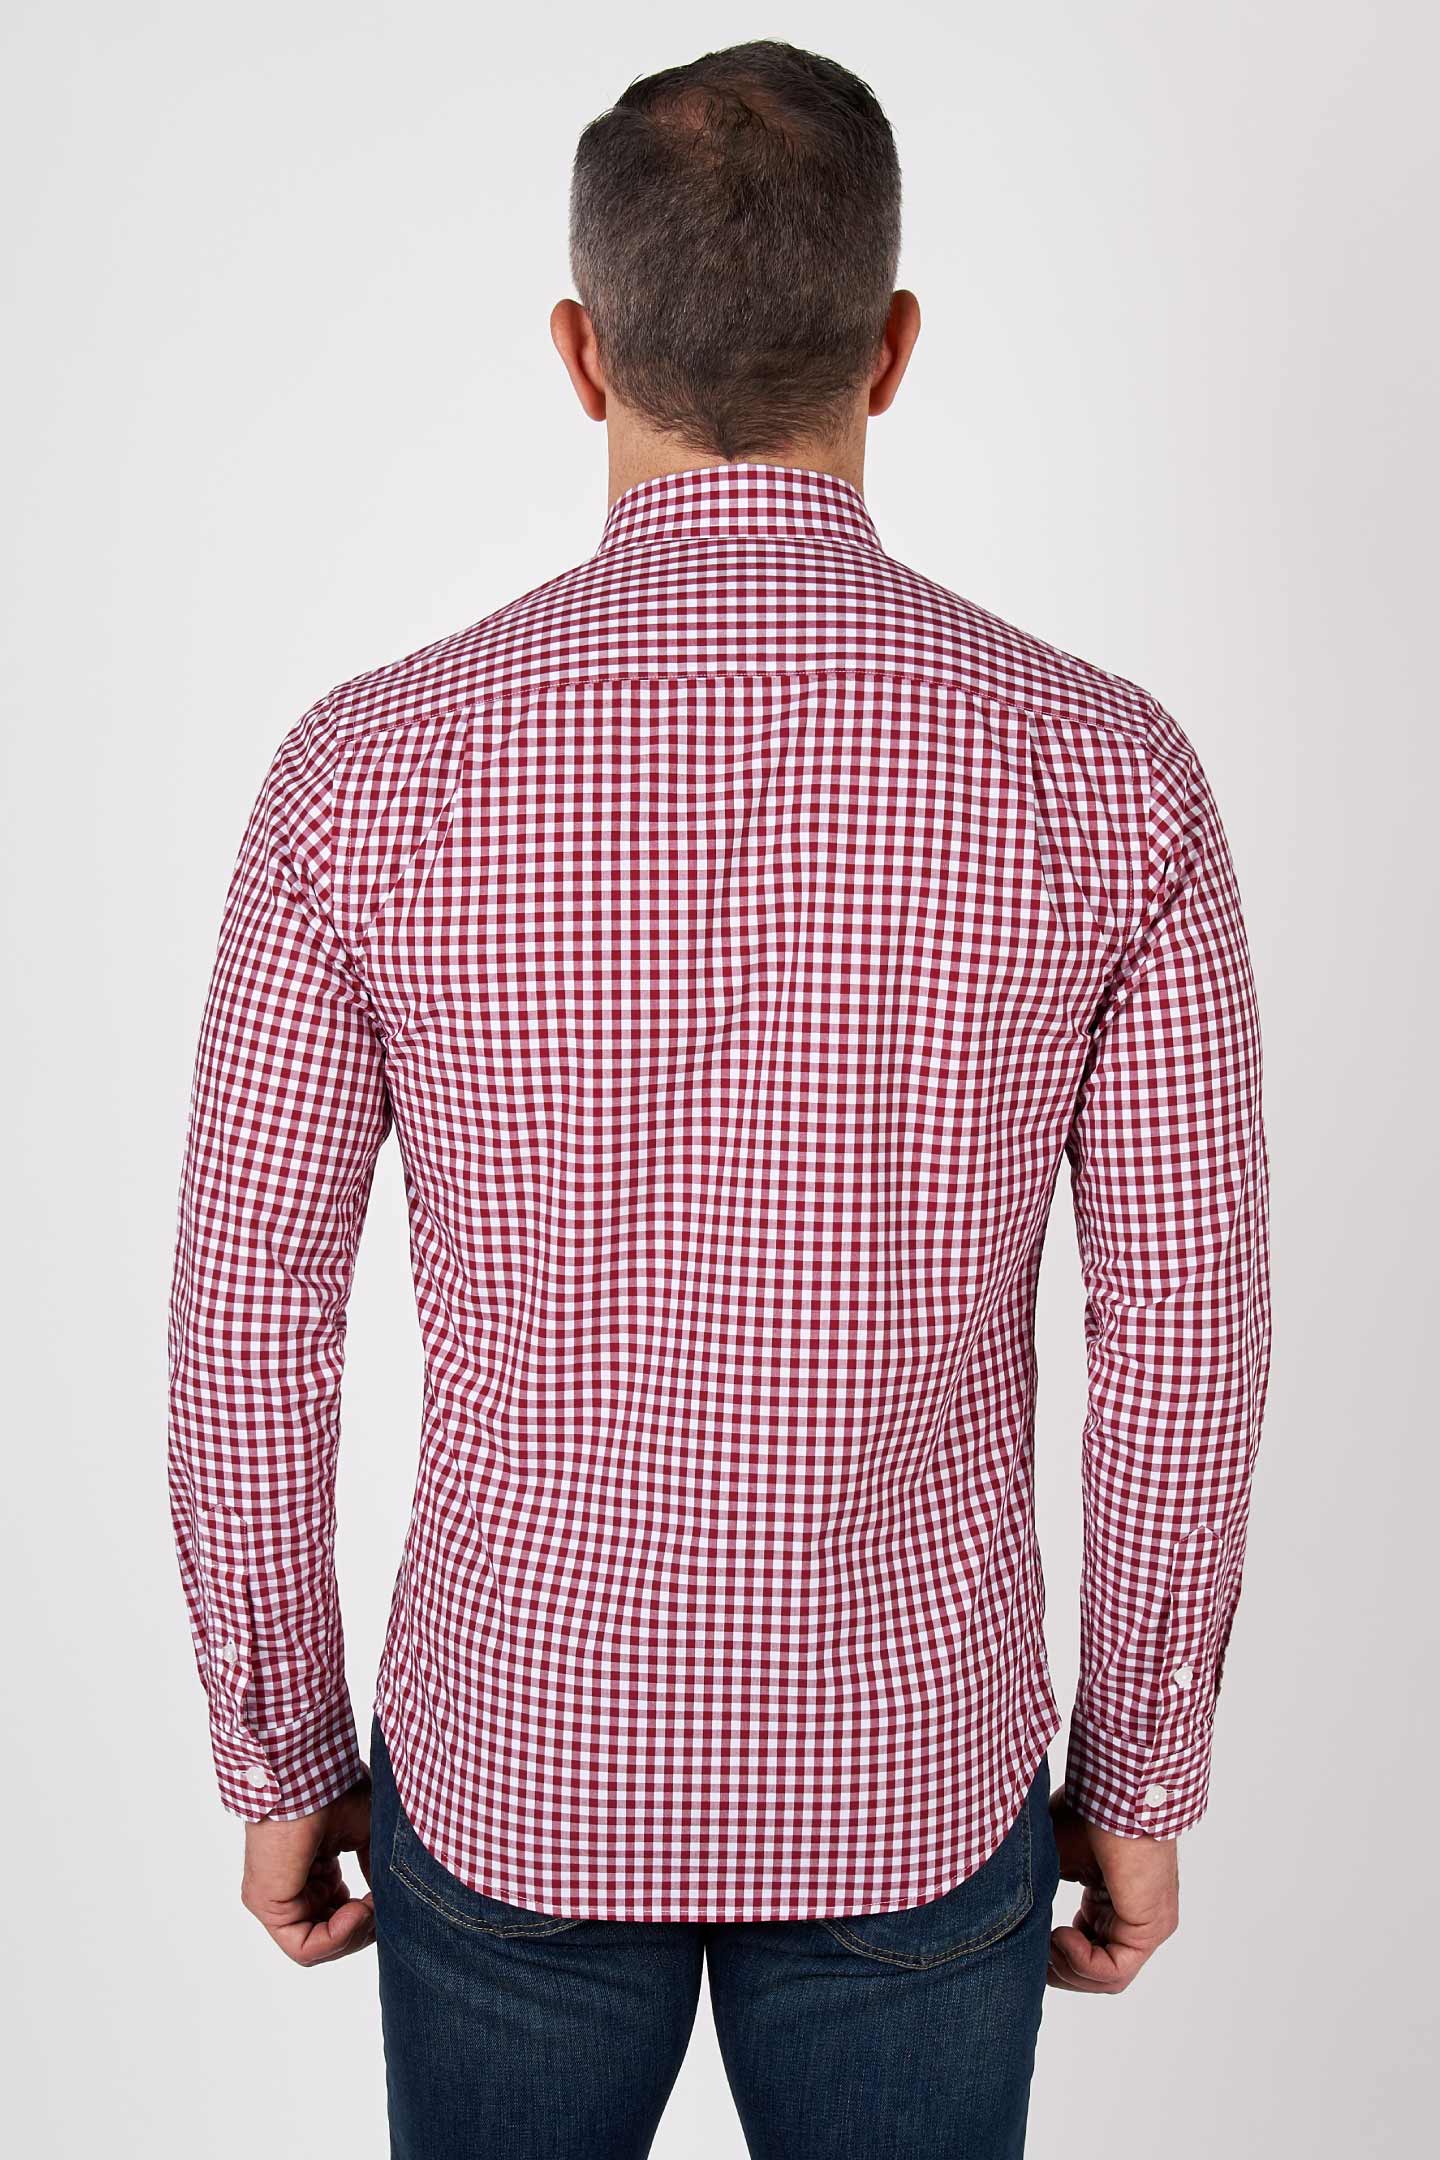 Buy Red Gingham Button-Down Shirt for Short Men | Ash & Erie   Everyday Shirts